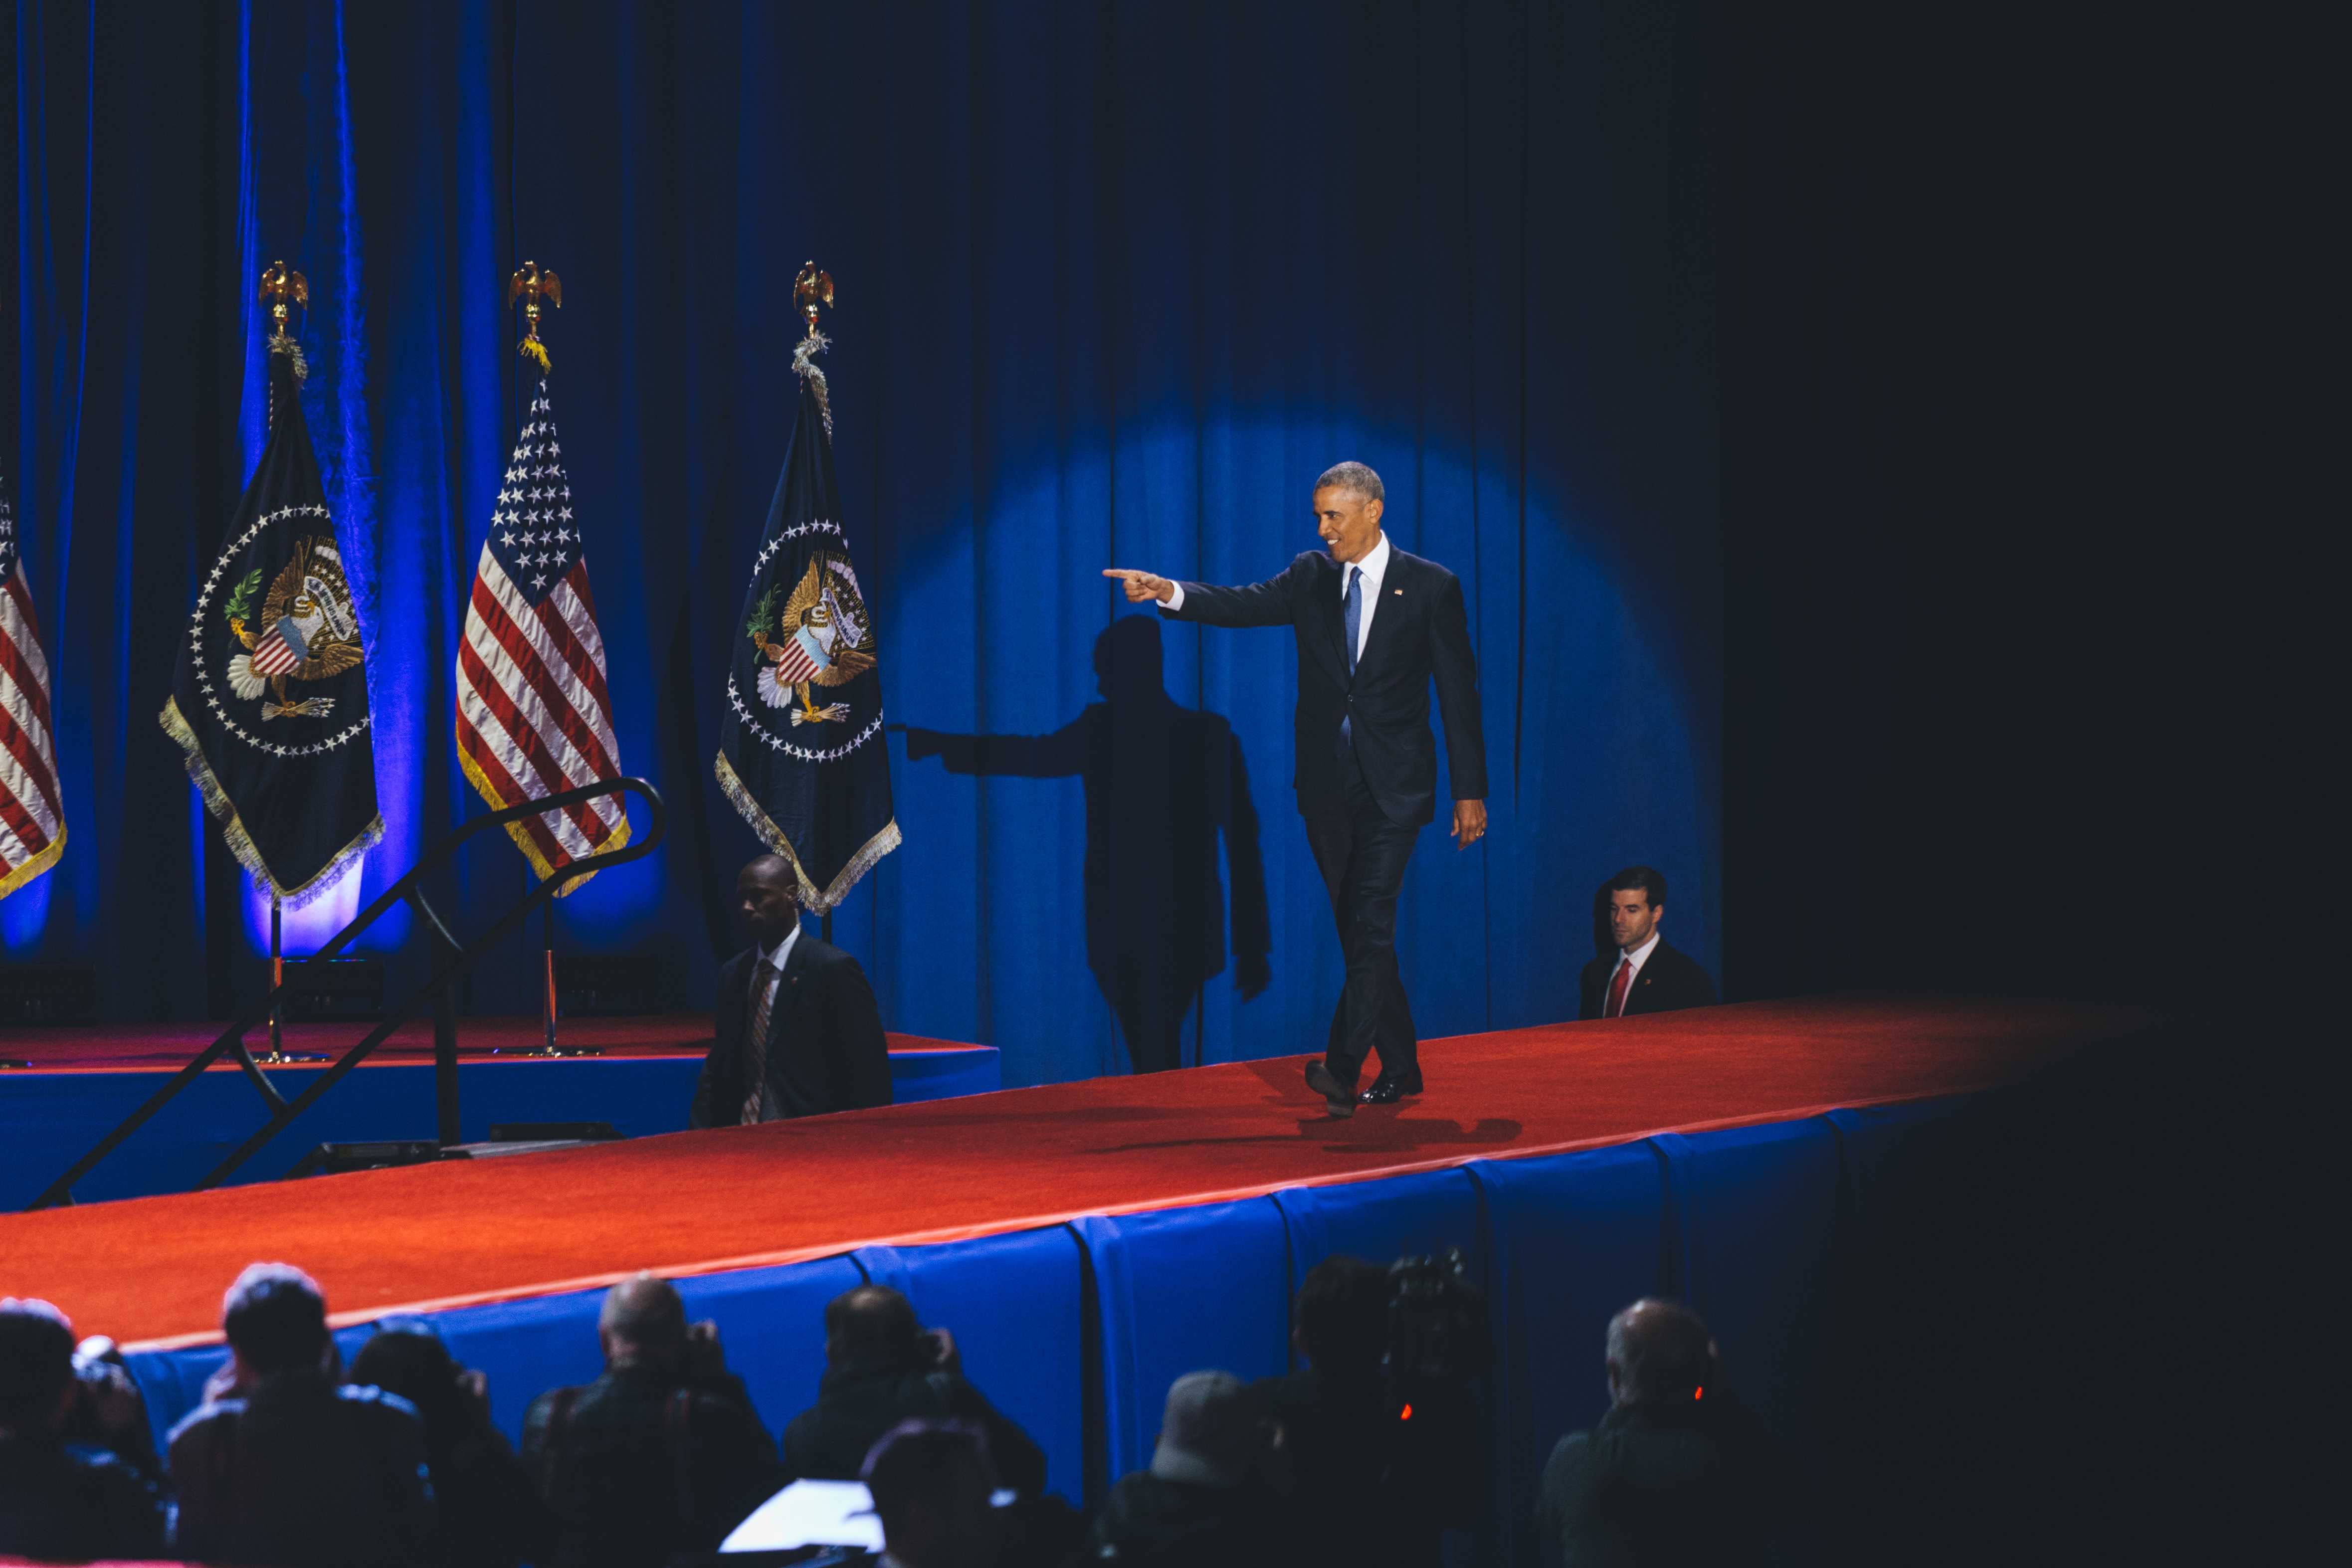 President Obama gives his farewell speech from McCormick Place, warning Americans not to take democracy for granted. (Josh Leff/The DePaulia)